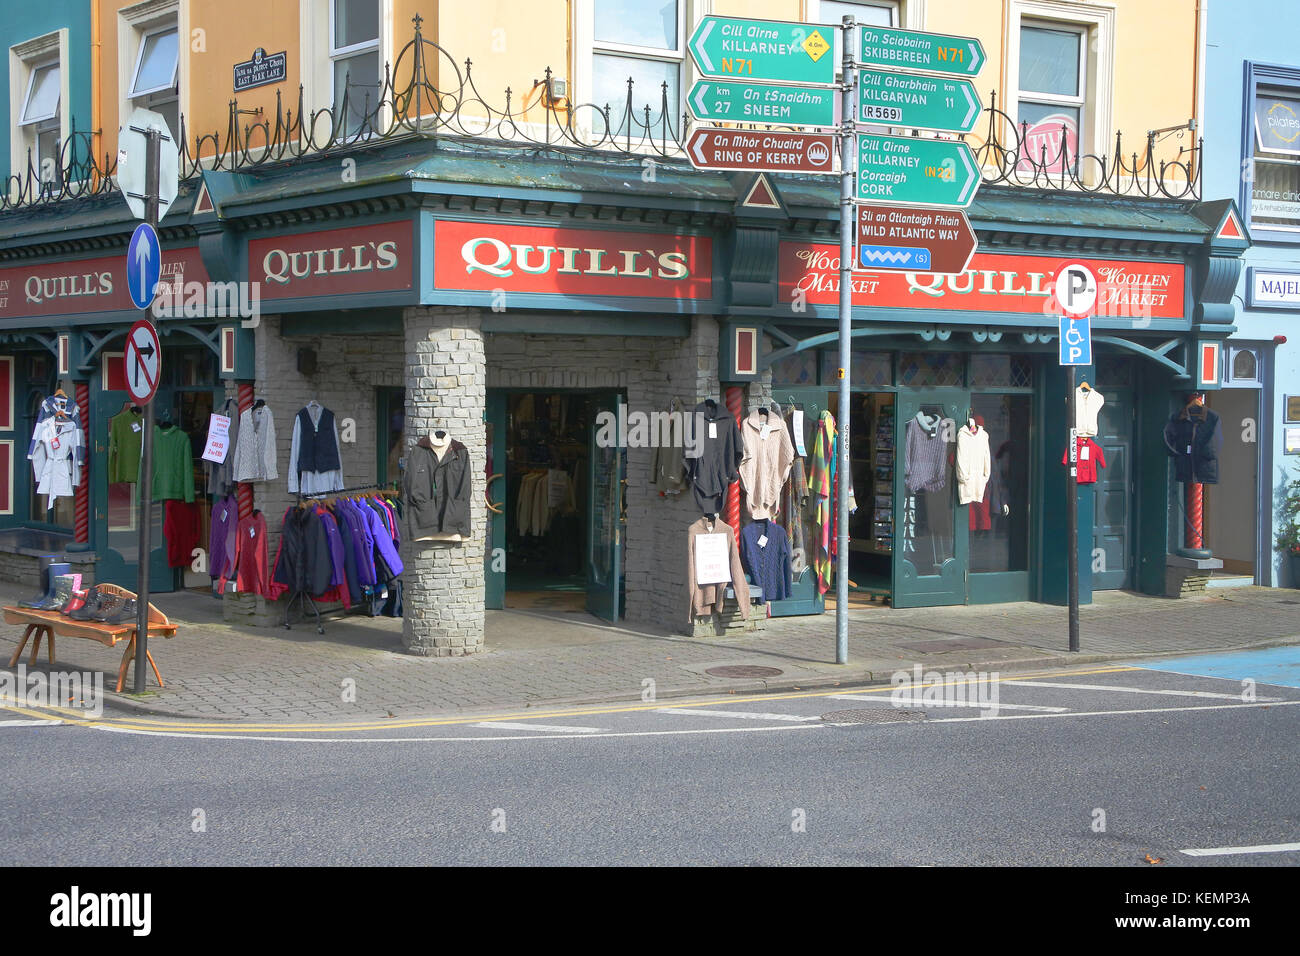 Quill's, Kenmare, County Kerry, Irland - John Gollop Stockfoto